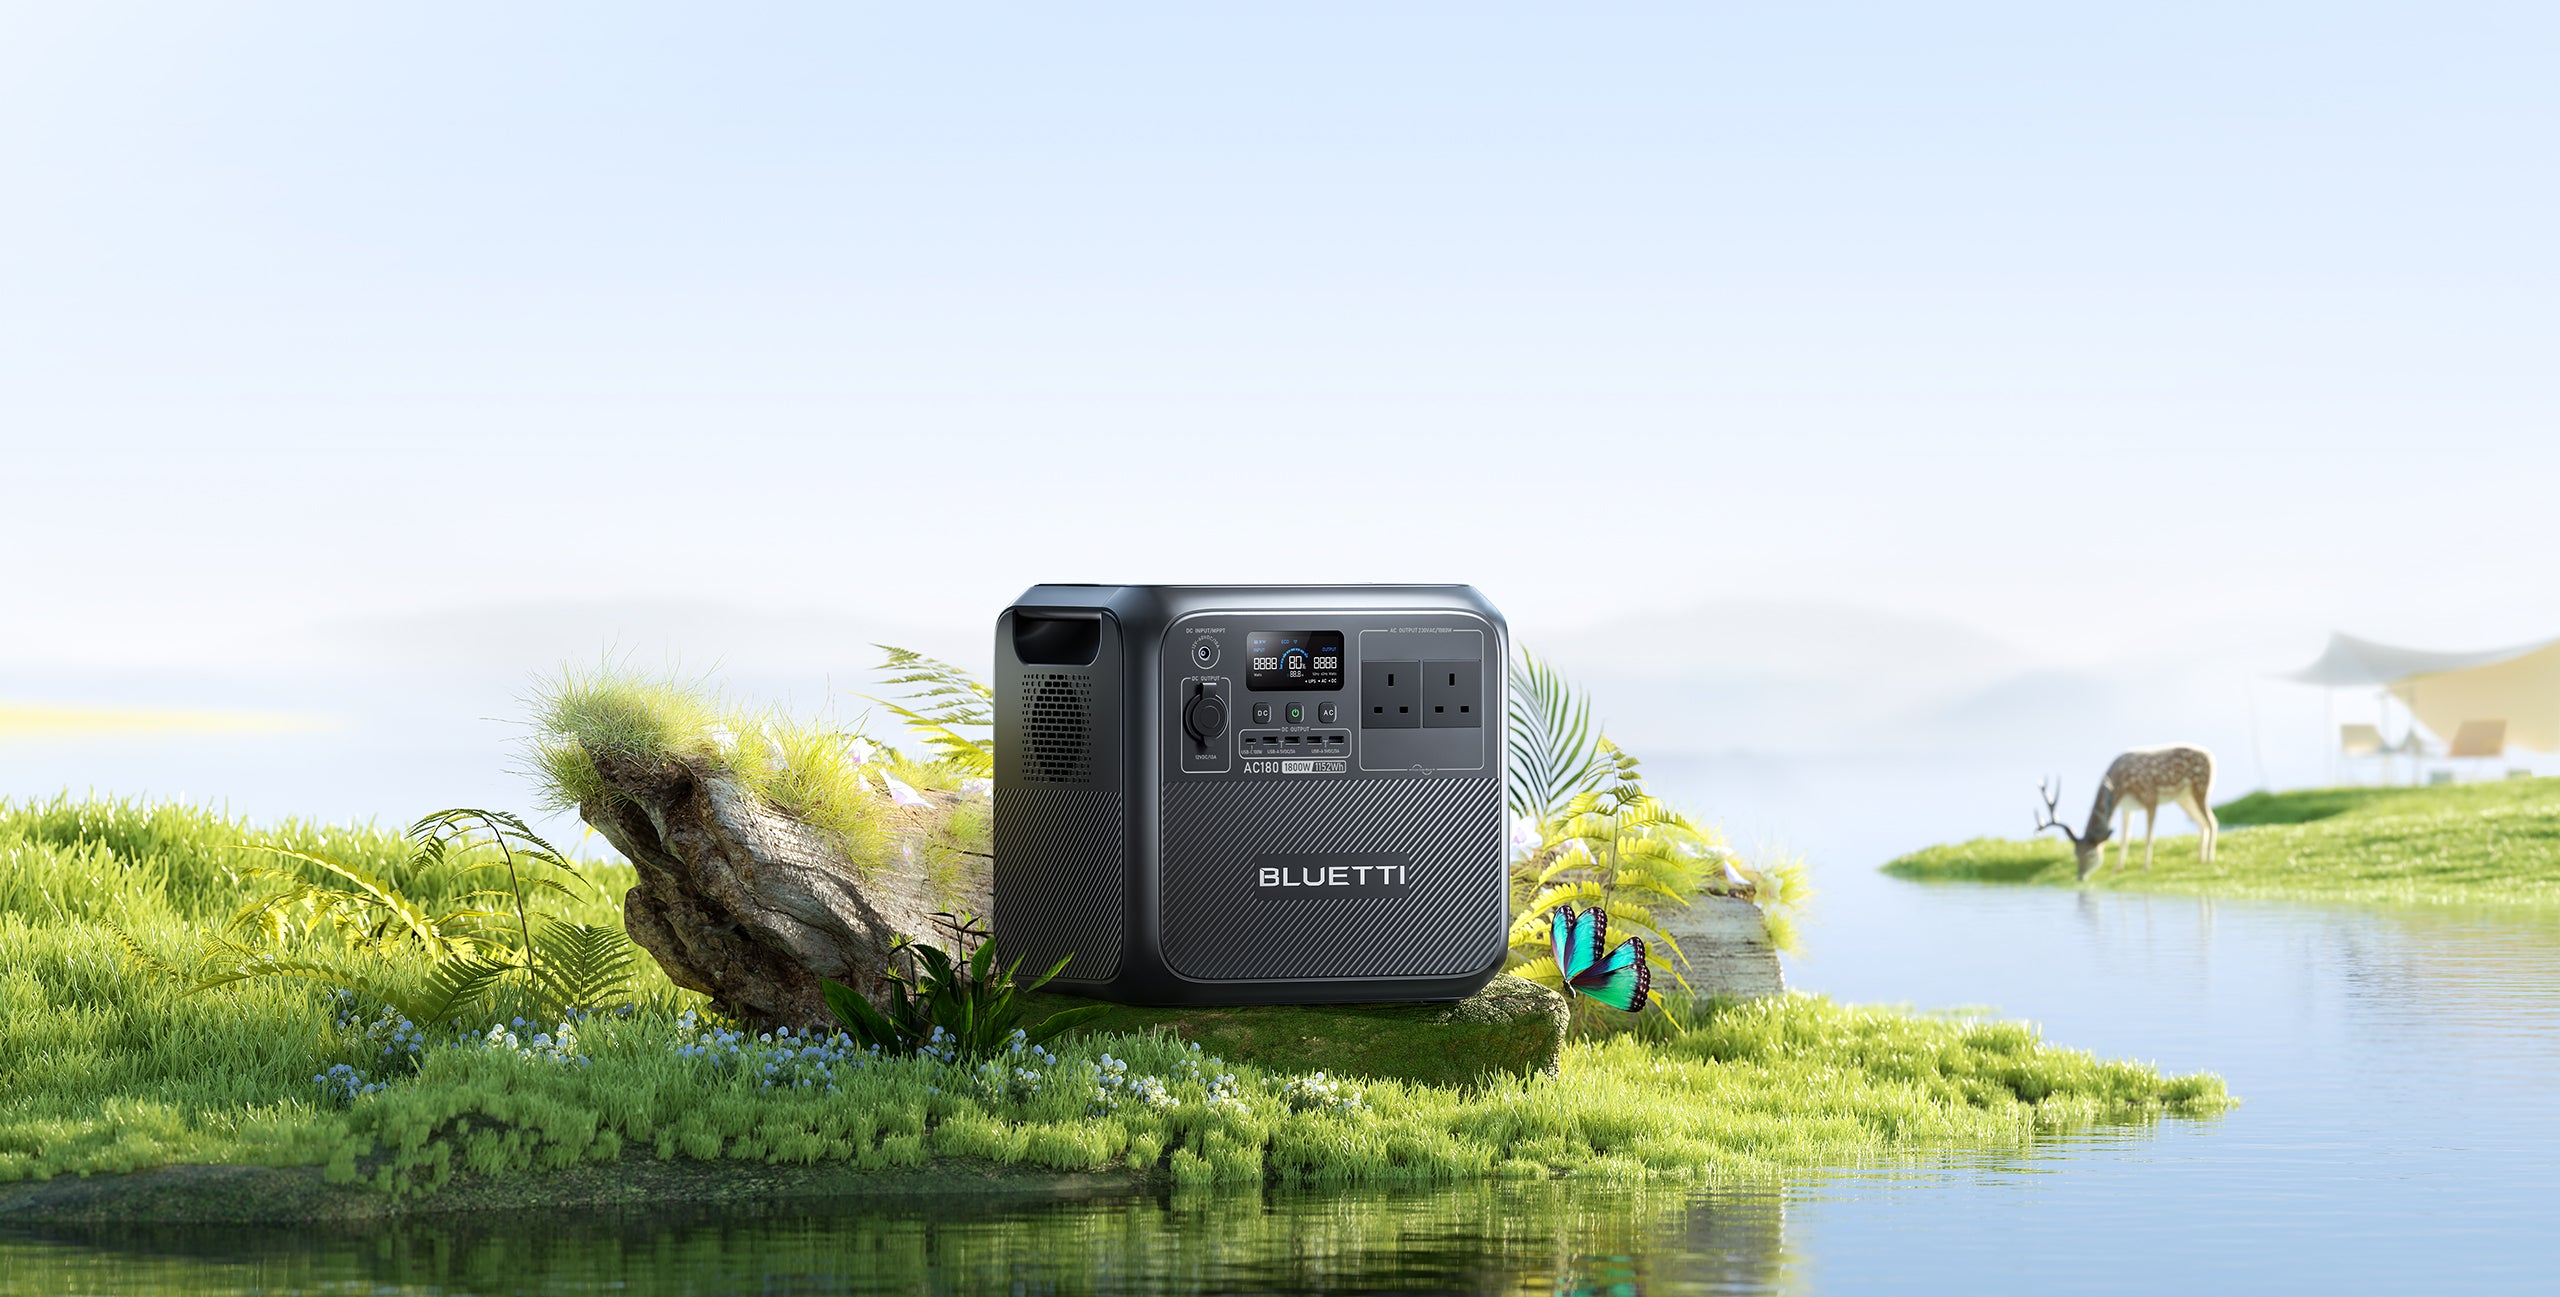 BLUETTI Launches AC180, New Innovation in Portable Power Stations - Europe